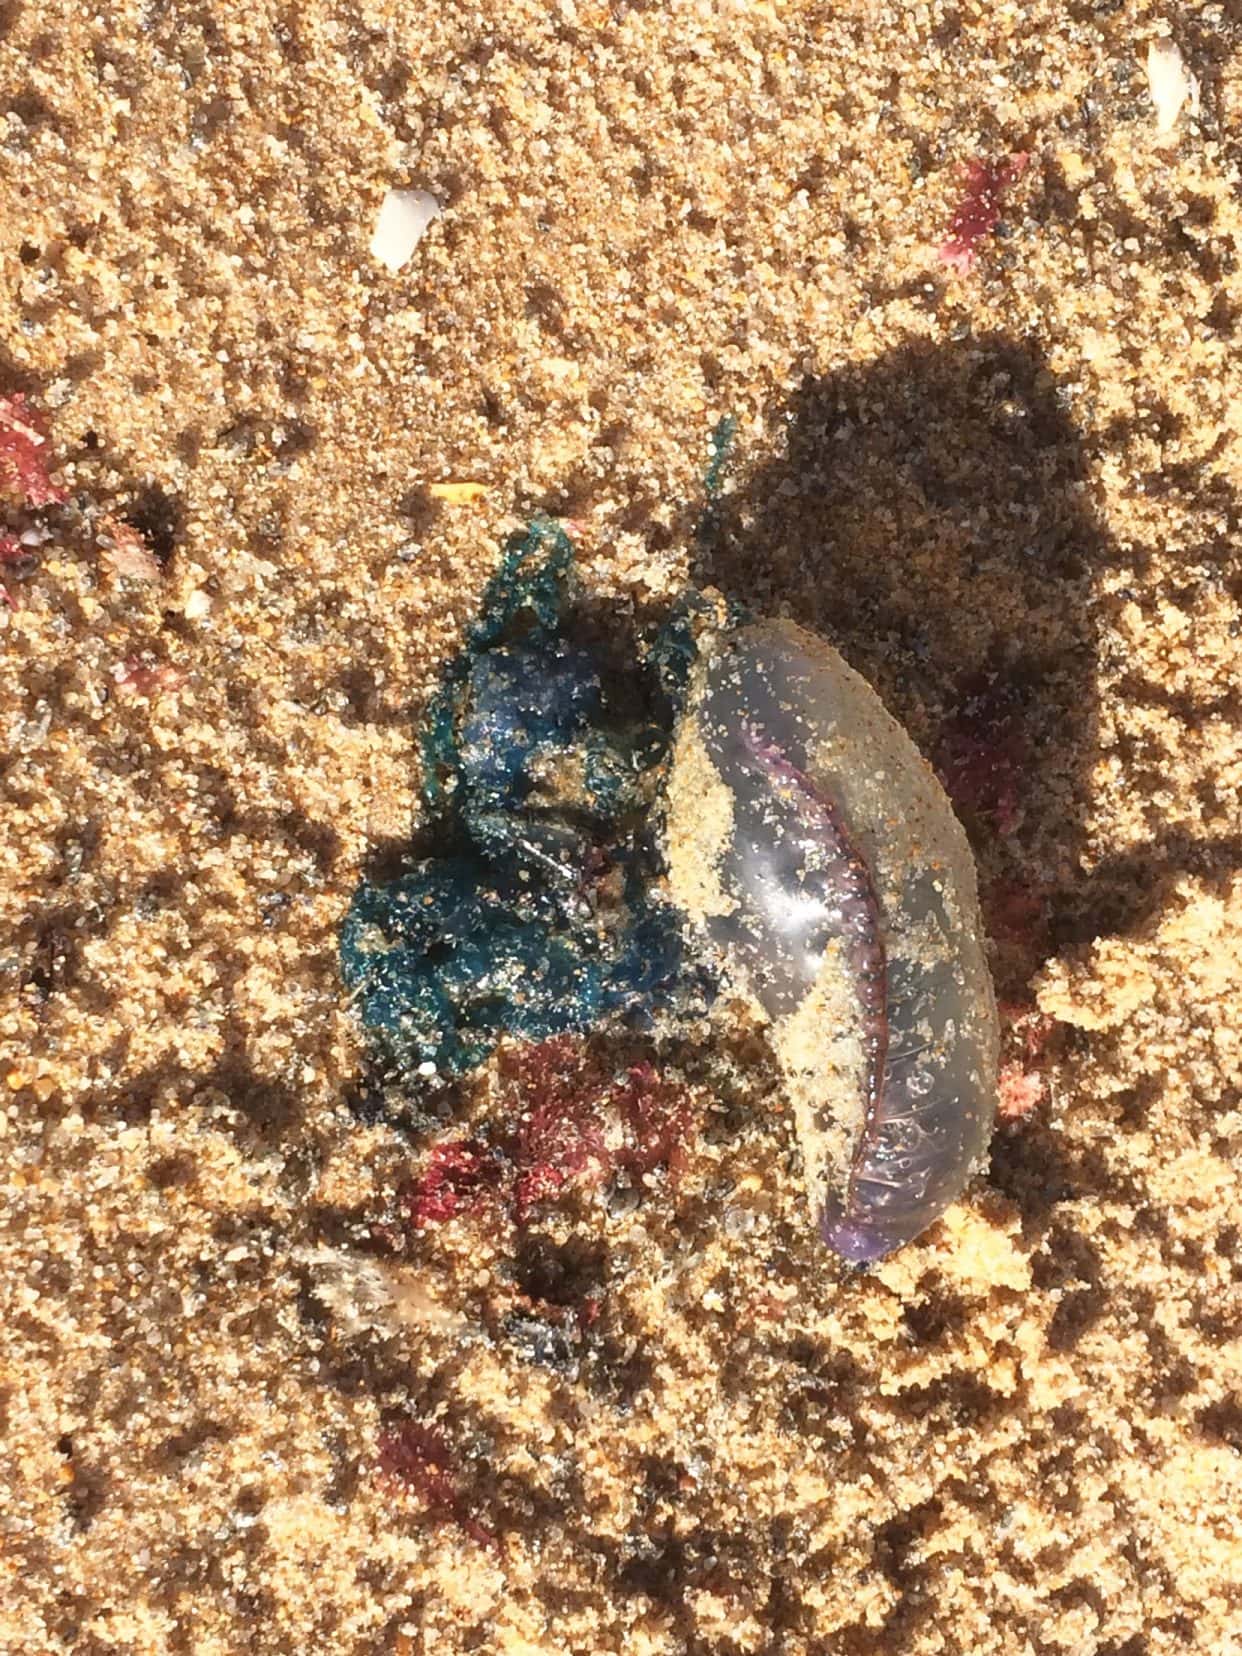 portuguese man of war jellyfish - a bubble like clear pouch wiht blue muddle of tentacle